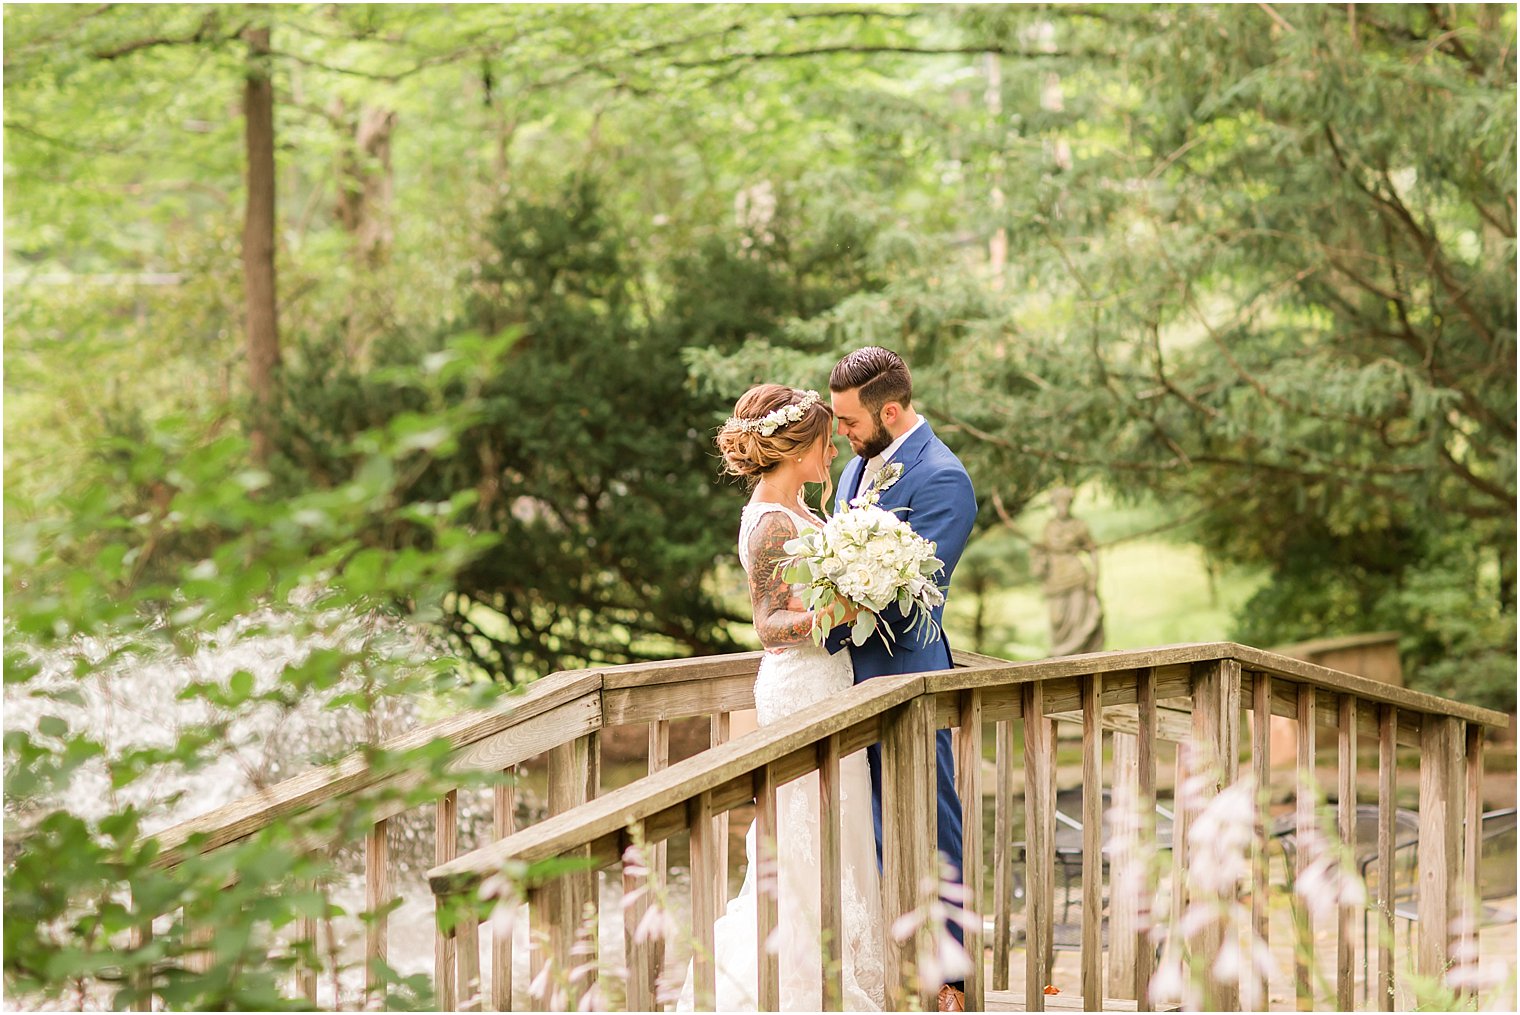 Sweet moment between bride and groom at Holly Hedge Estate | Photo by Idalia Photography